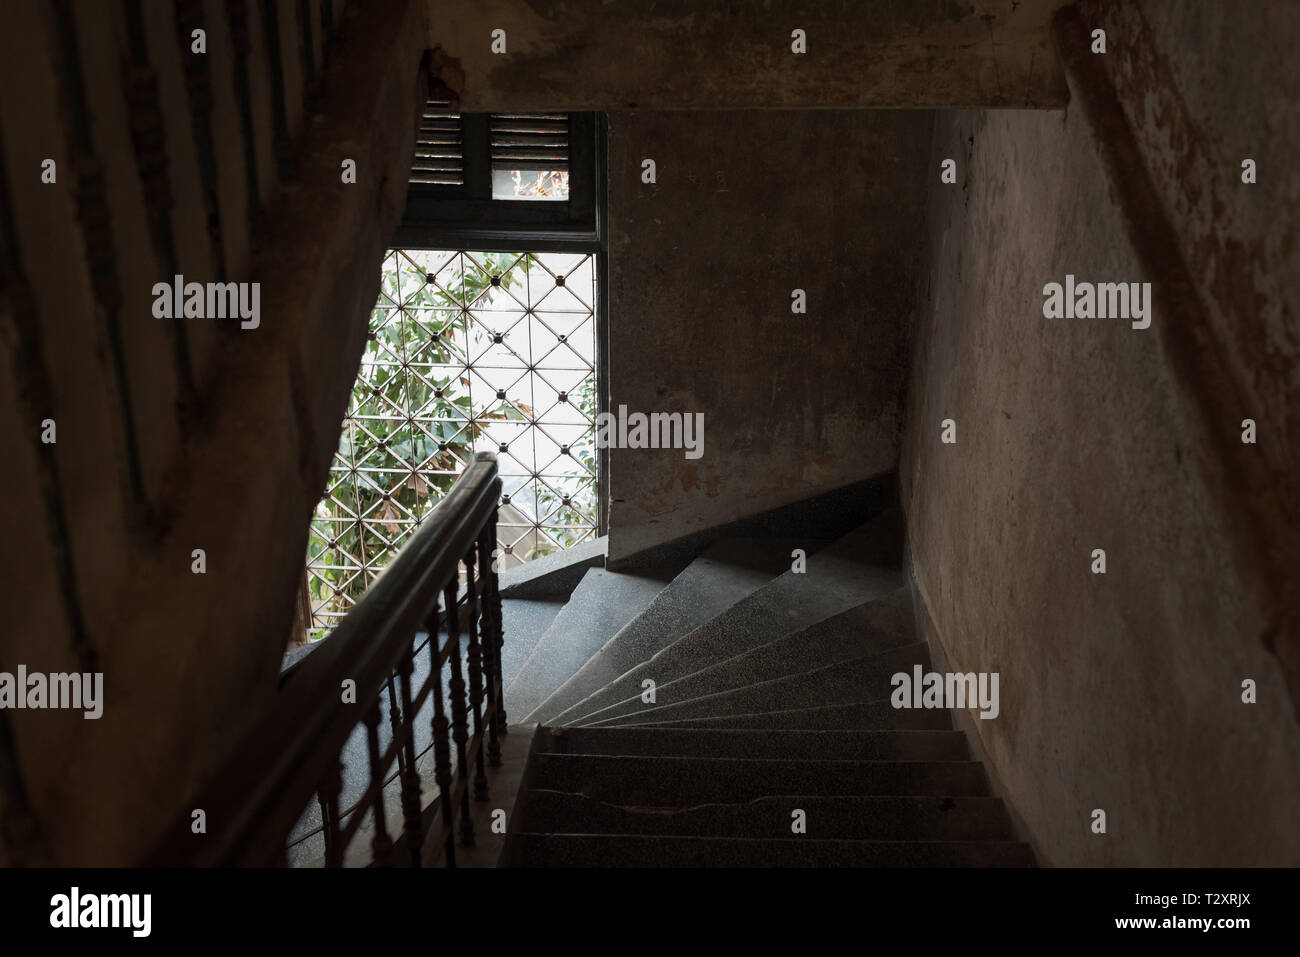 Dark stair descent in an old house with natural light coming from a barred window. The Mansion or Villa Bodega, Phnom Penh, Cambodia. Stock Photo